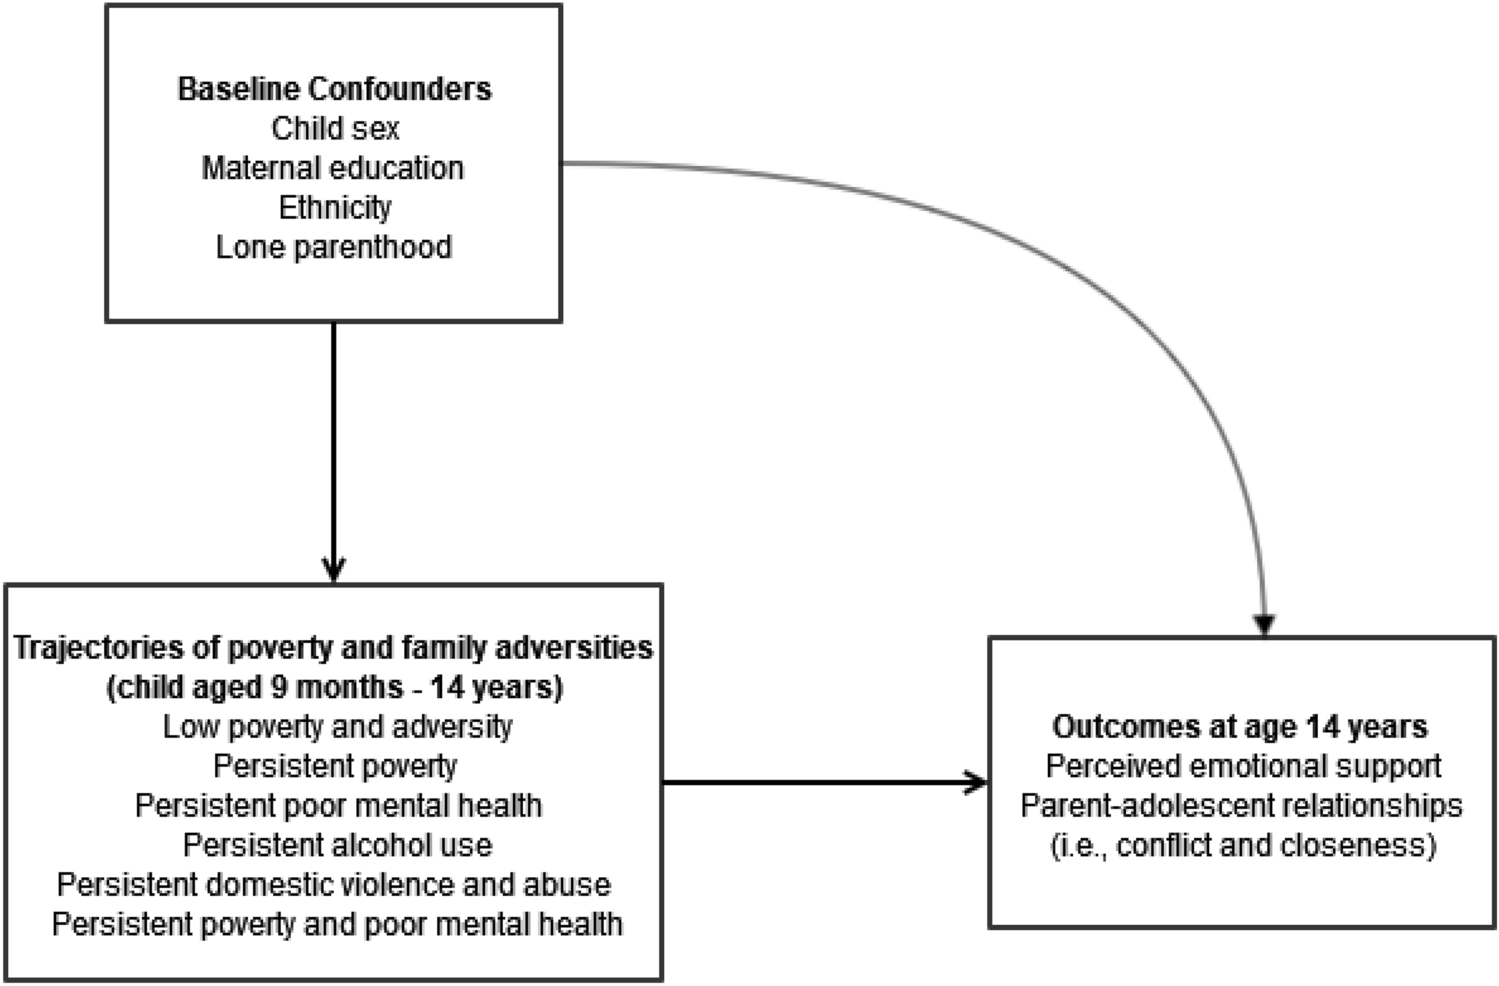 Impact of poverty and adversity on perceived family support in adolescence: findings from the UK Millennium Cohort Study